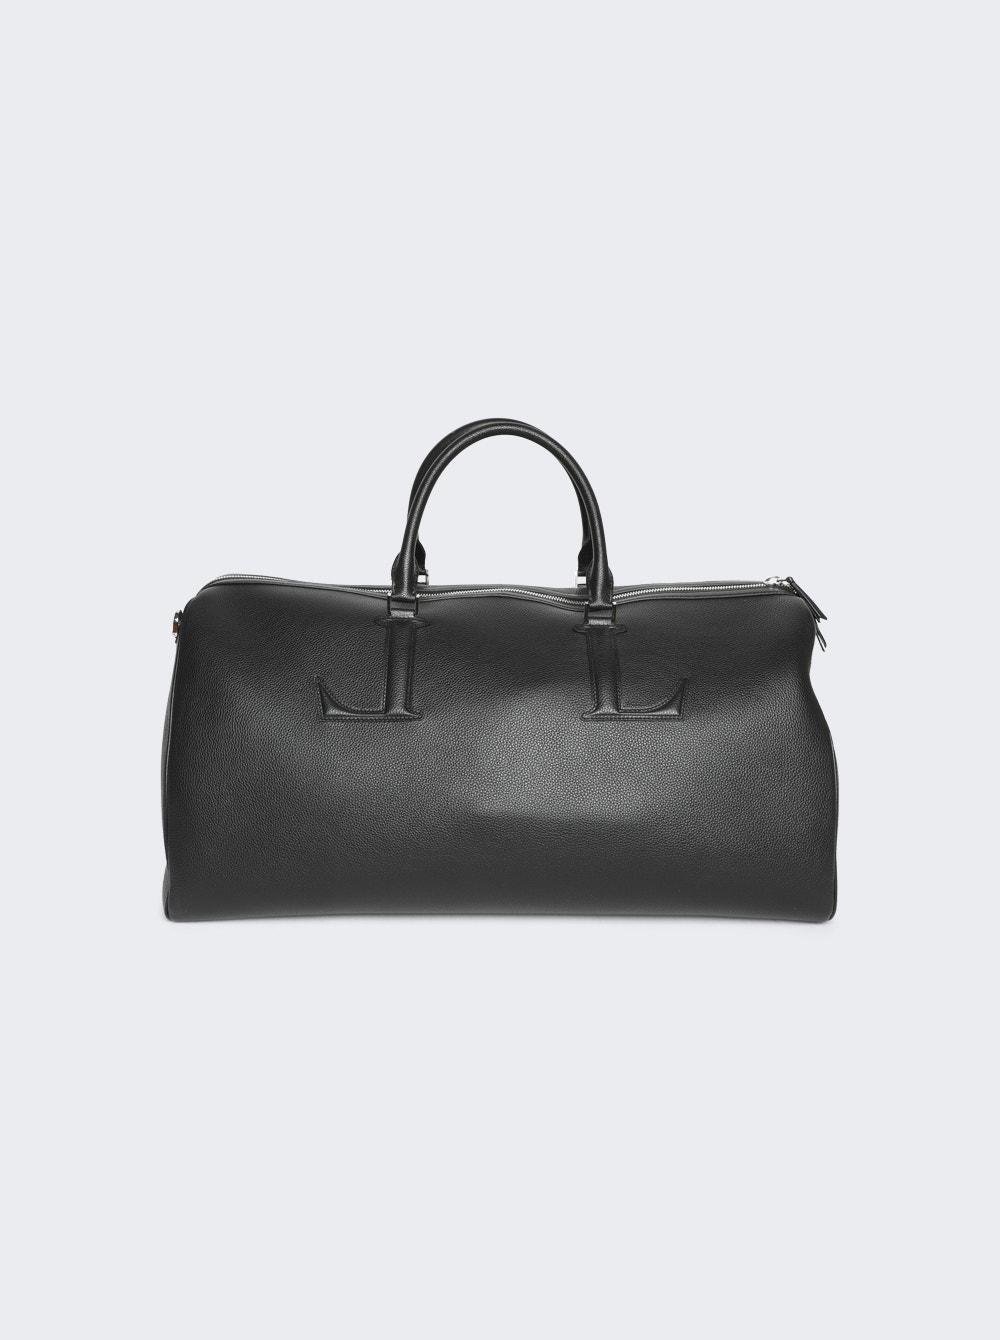 Signature Duffle Bag Black  | The Webster by LANVIN